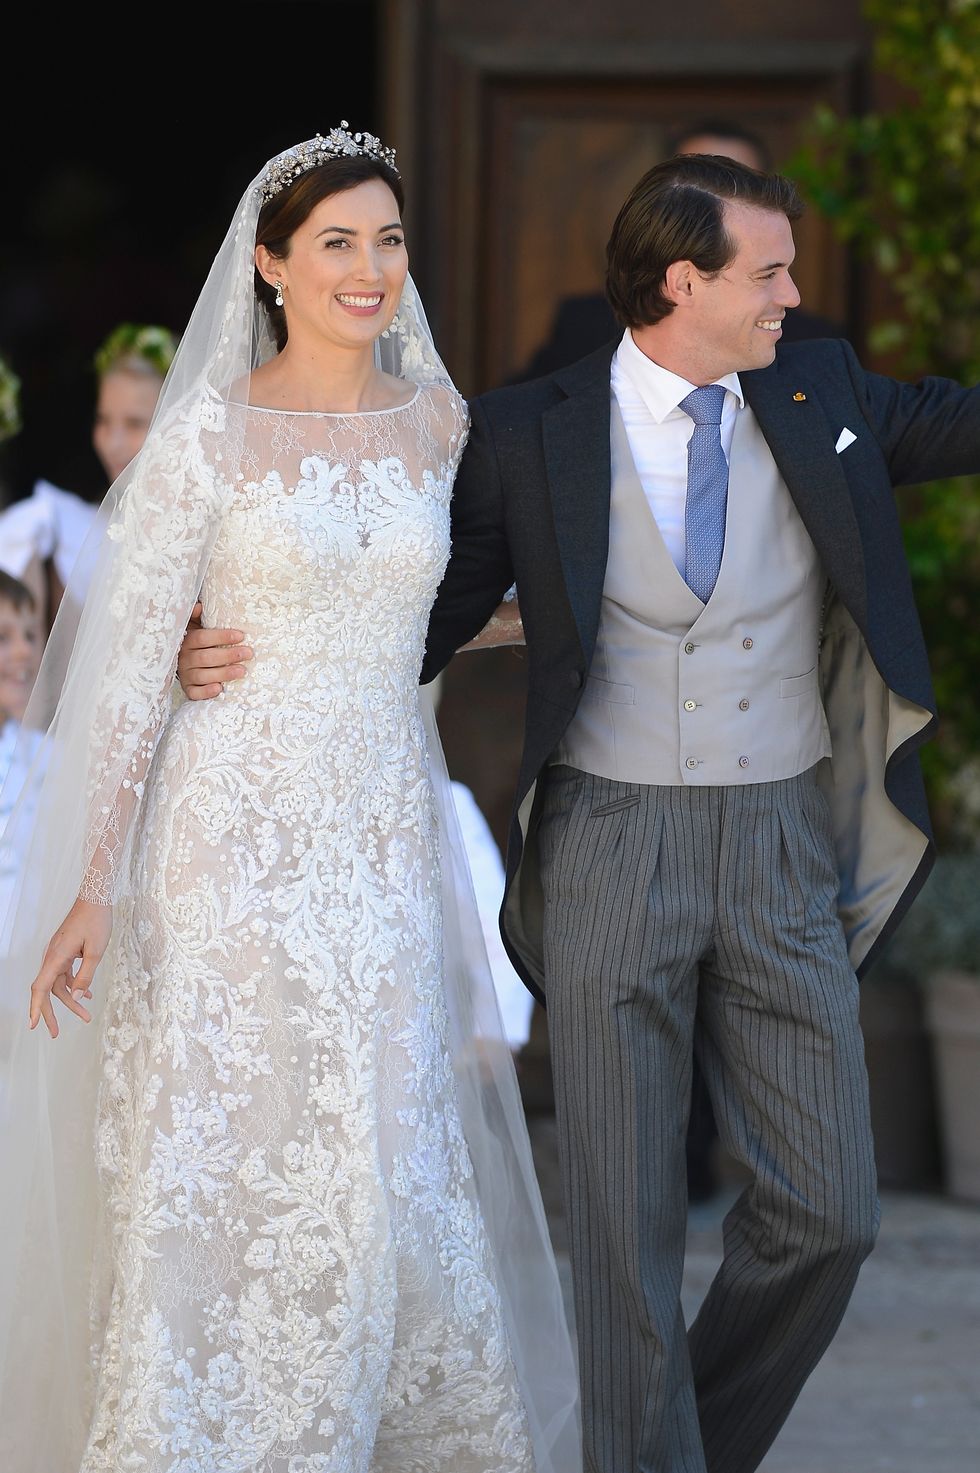 religious wedding of prince felix of luxembourg  claire lademacher